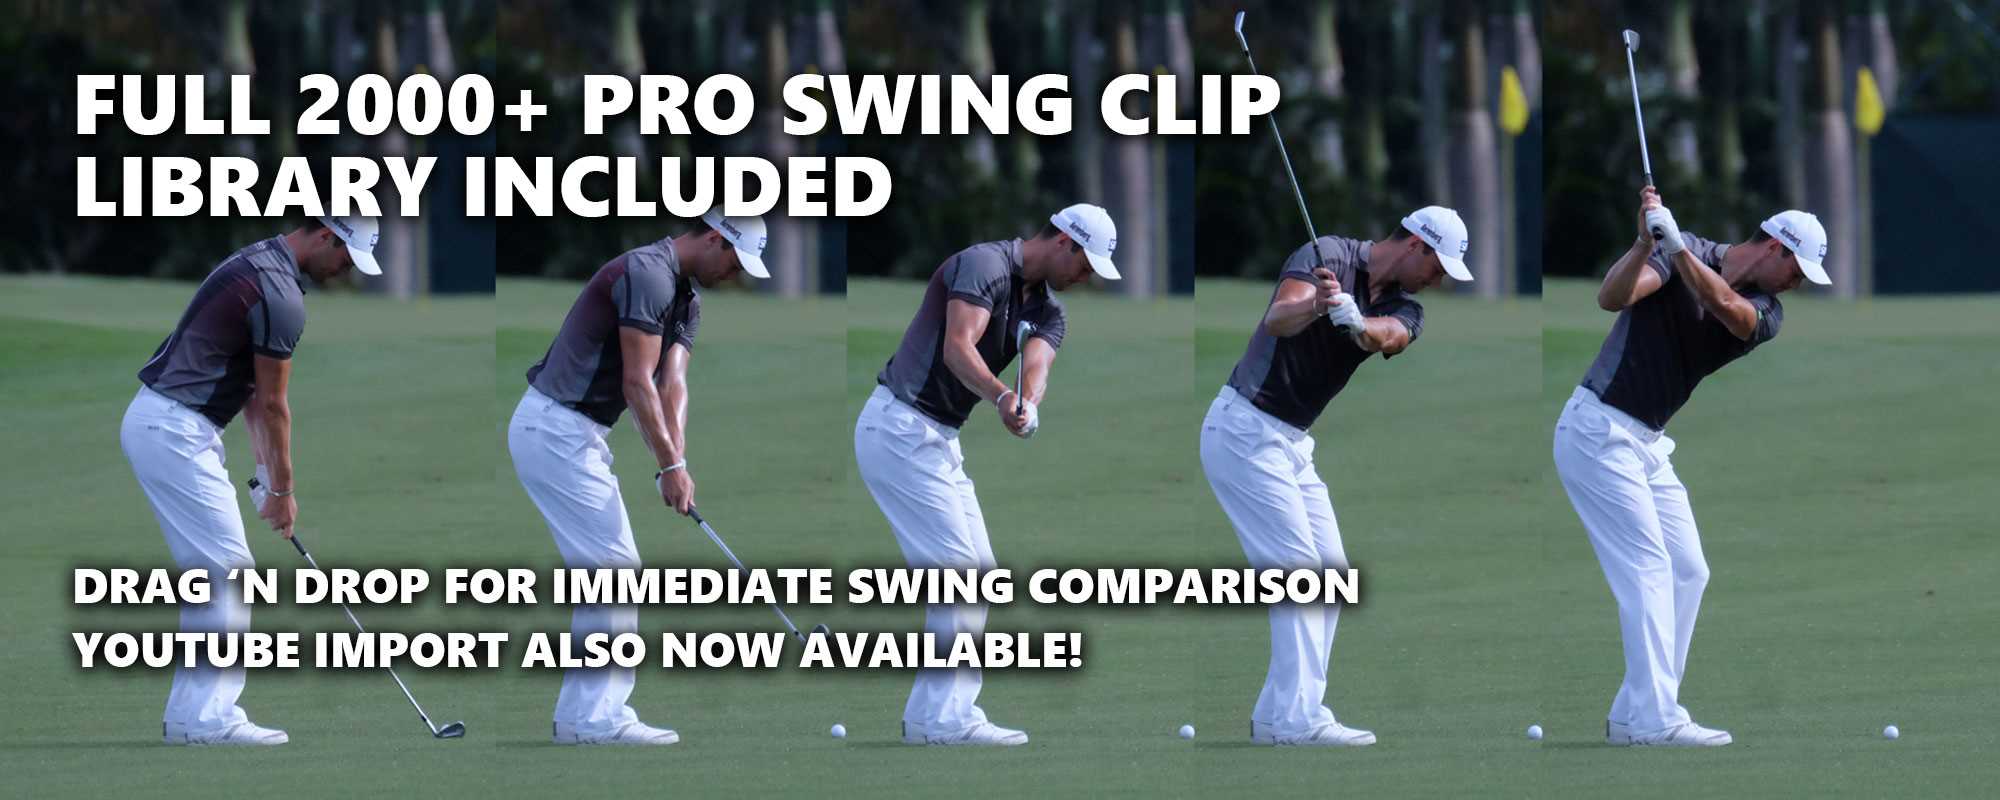 Full 2000+ pro swing clip library included